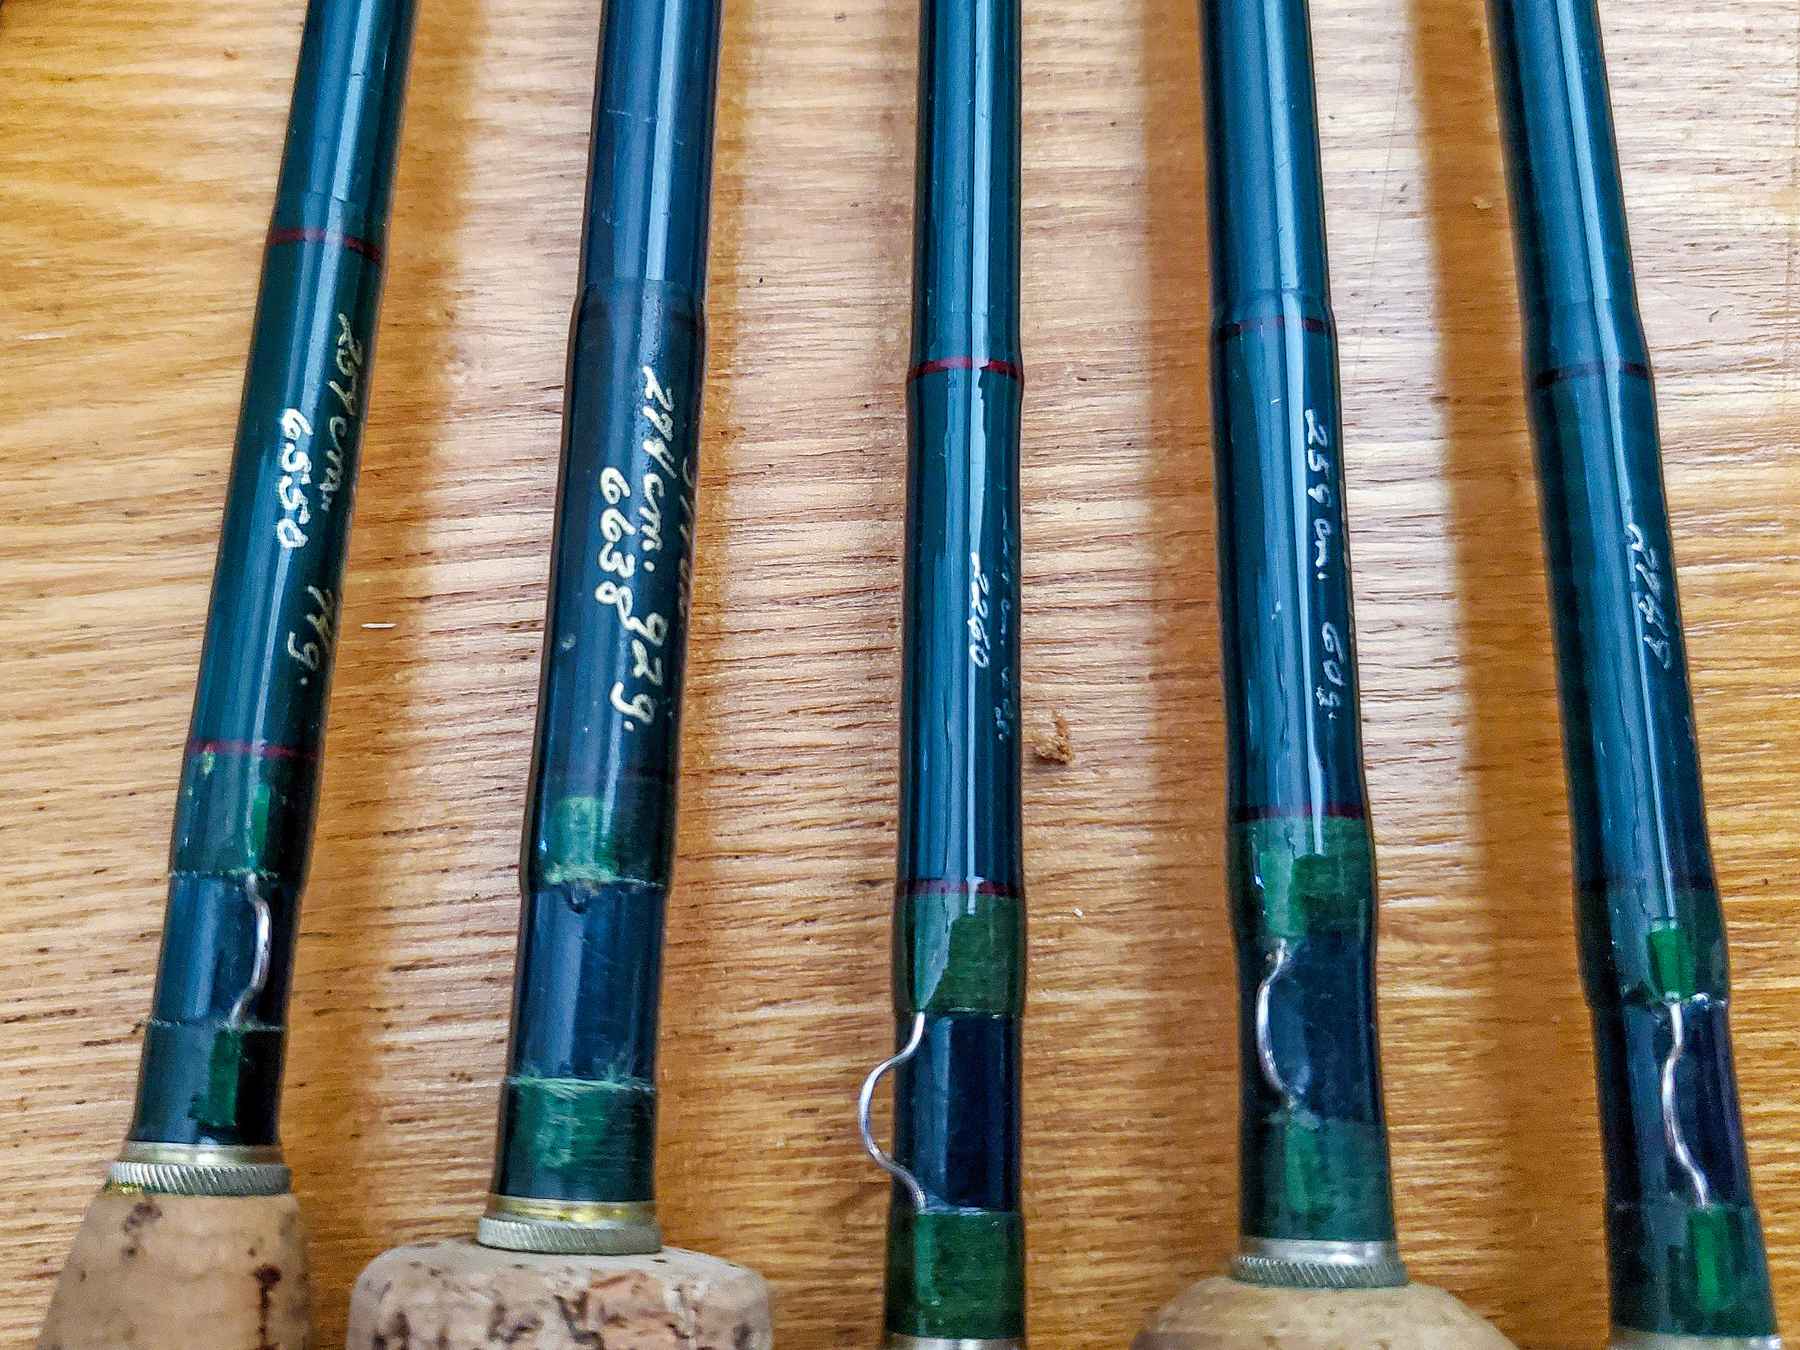 Winston Rod Sale Items - The Fly Shack Fly Fishing